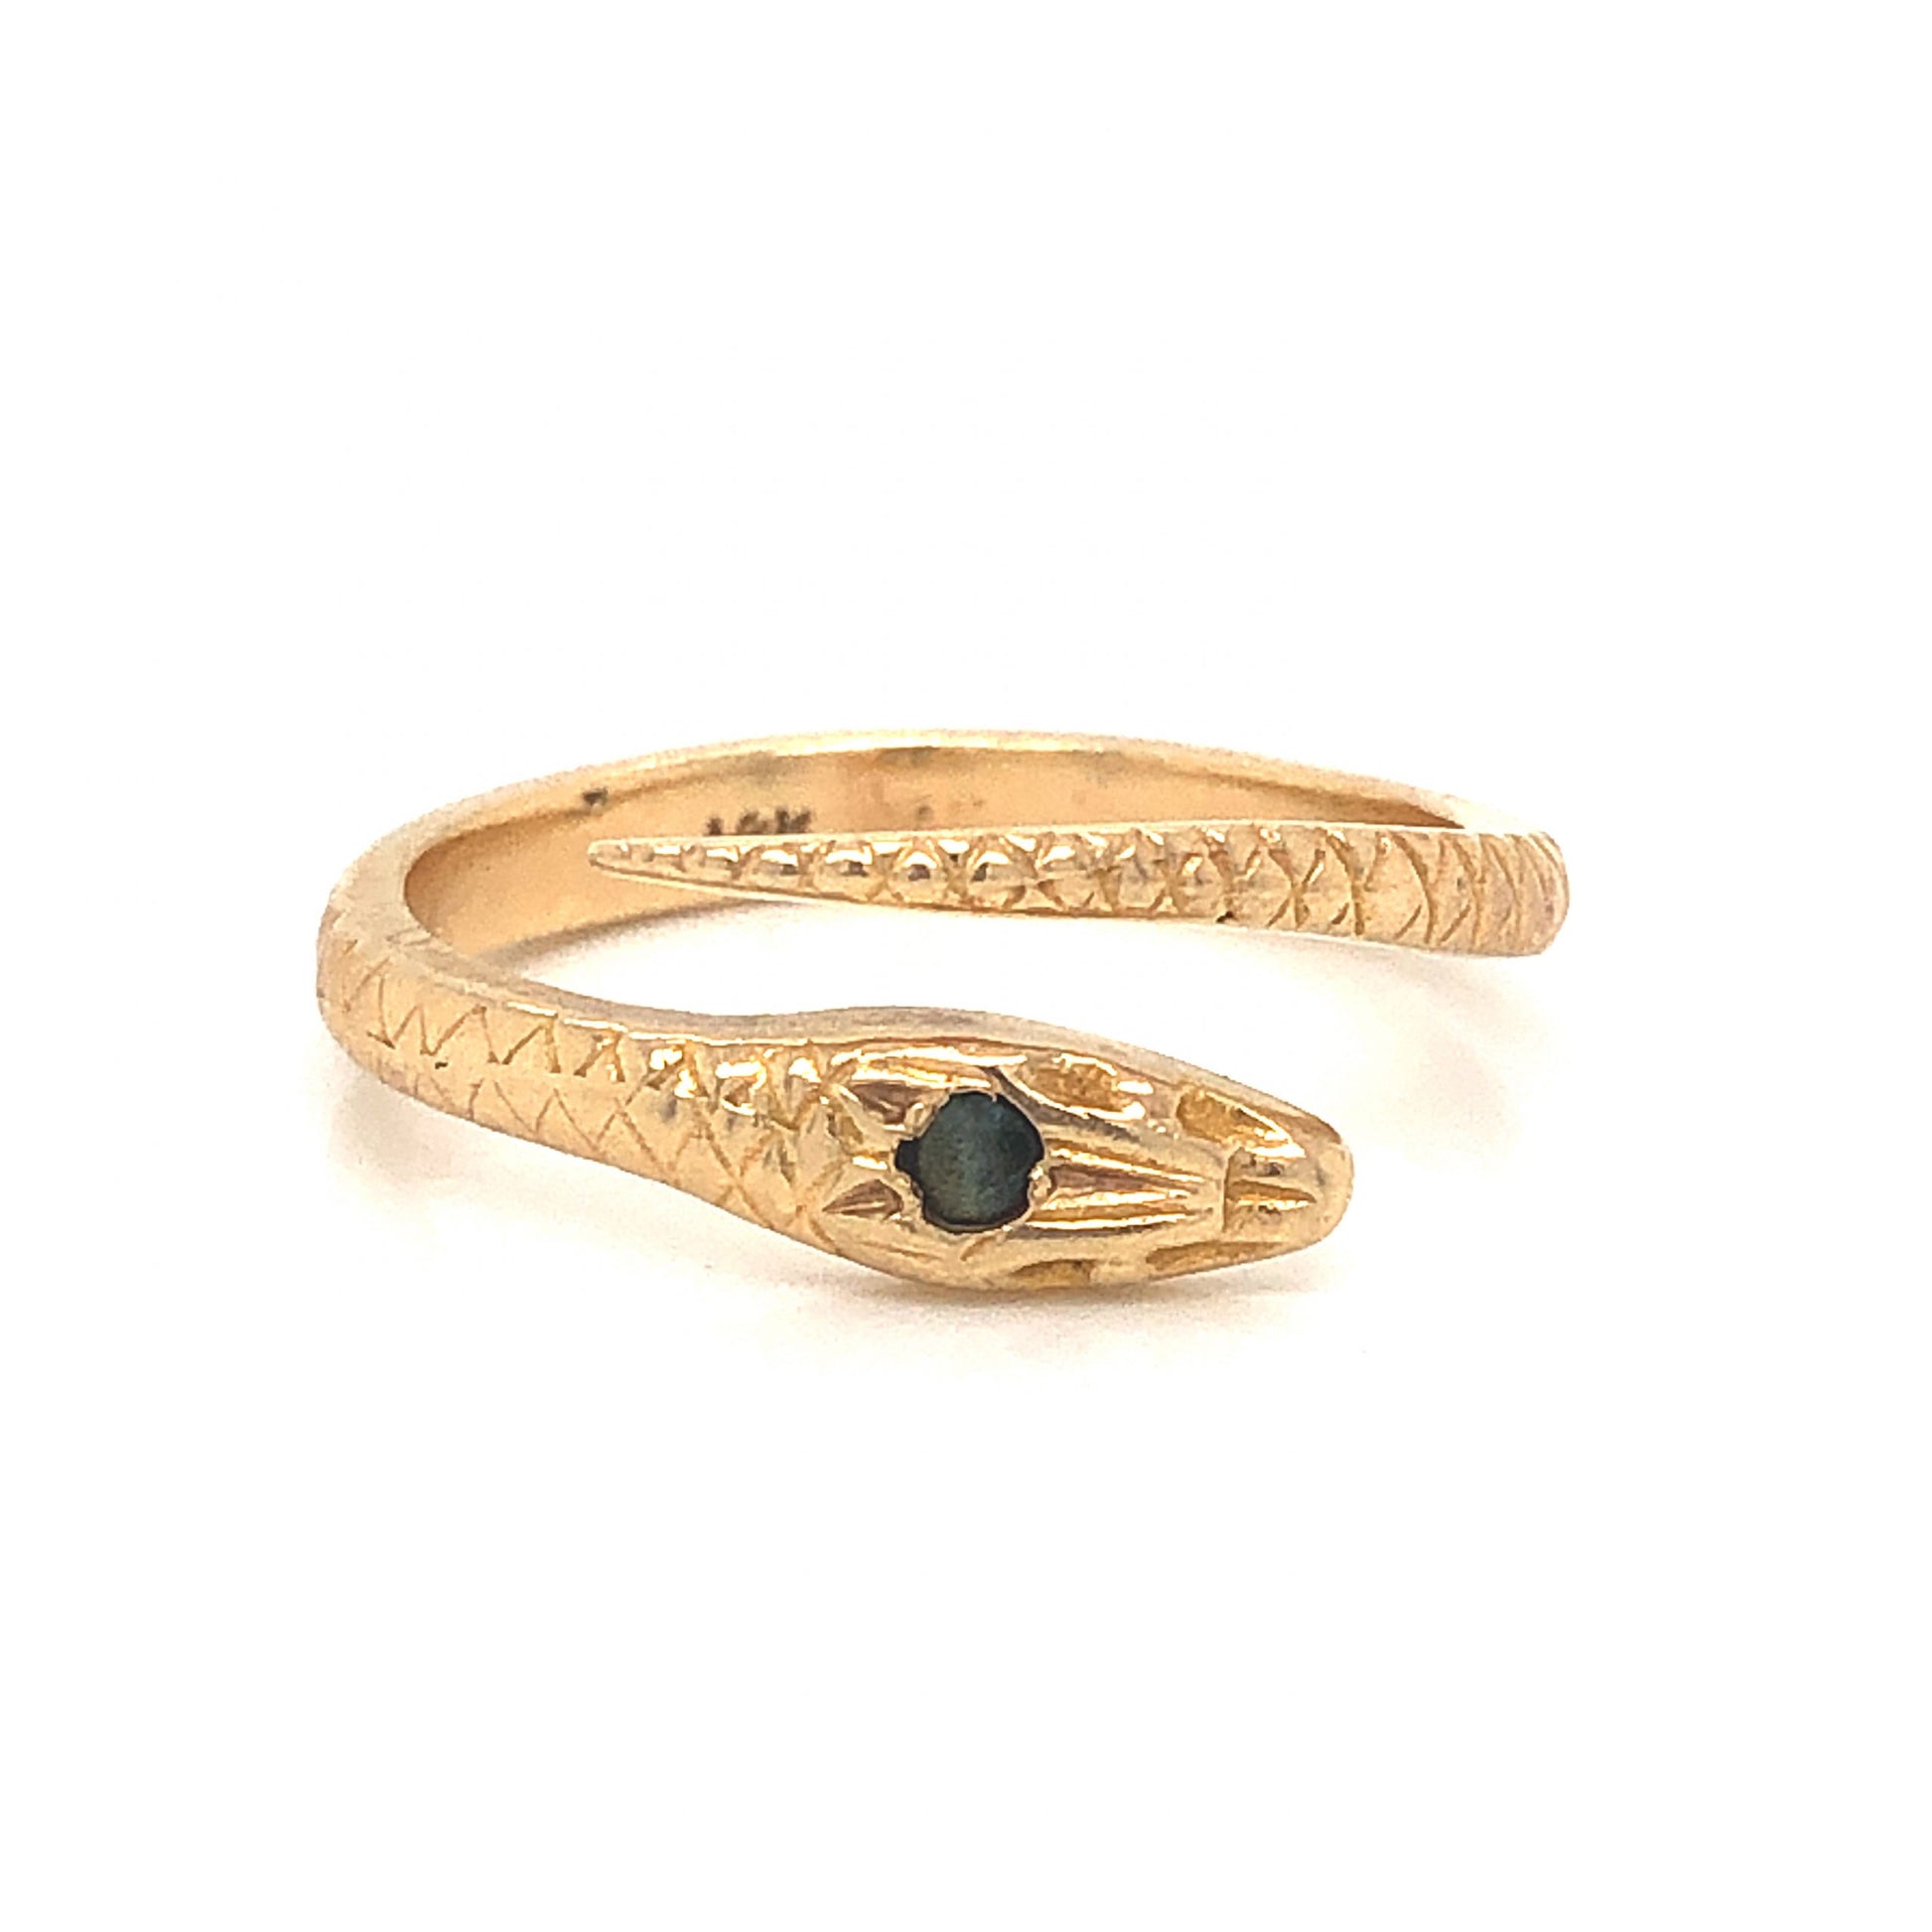 Victorian Sapphire Snake Ring in 14k Yellow GoldComposition: Platinum Ring Size: 6 Total Gram Weight: 2.8 g Inscription: 14k
      